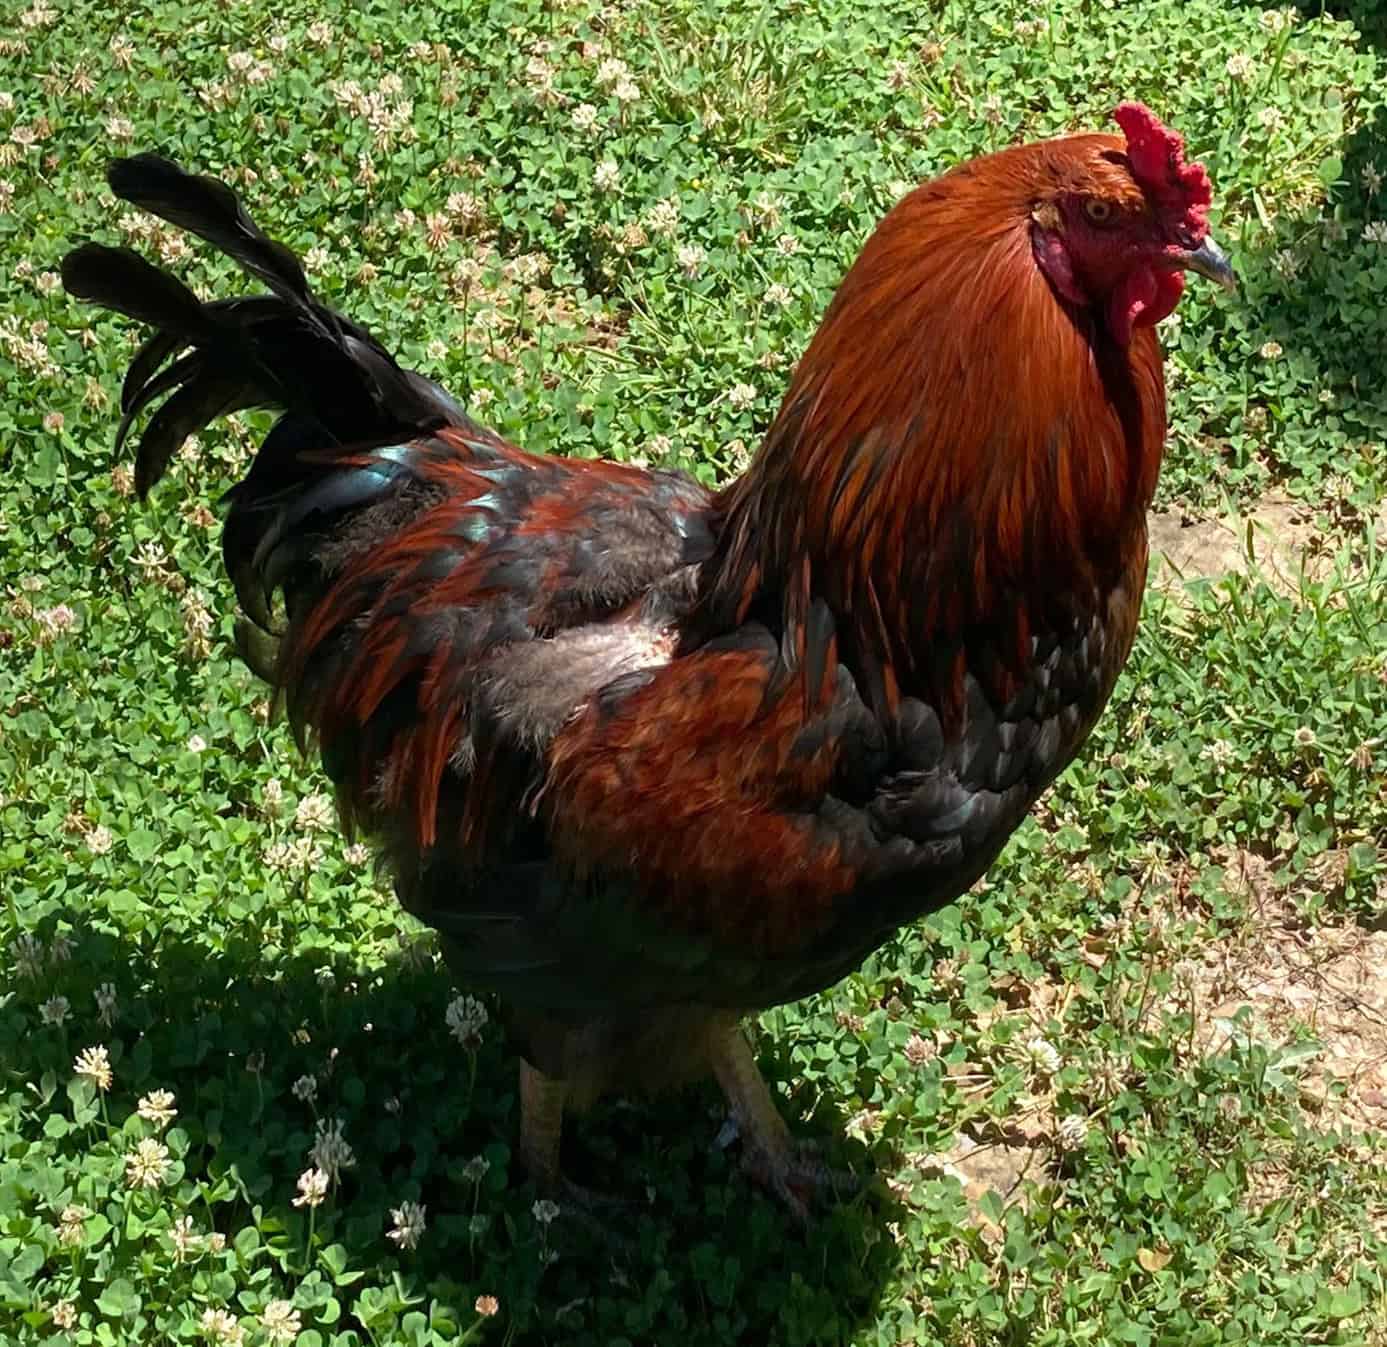 Our Neighbor’s Dog Caught Randy the Rooster!